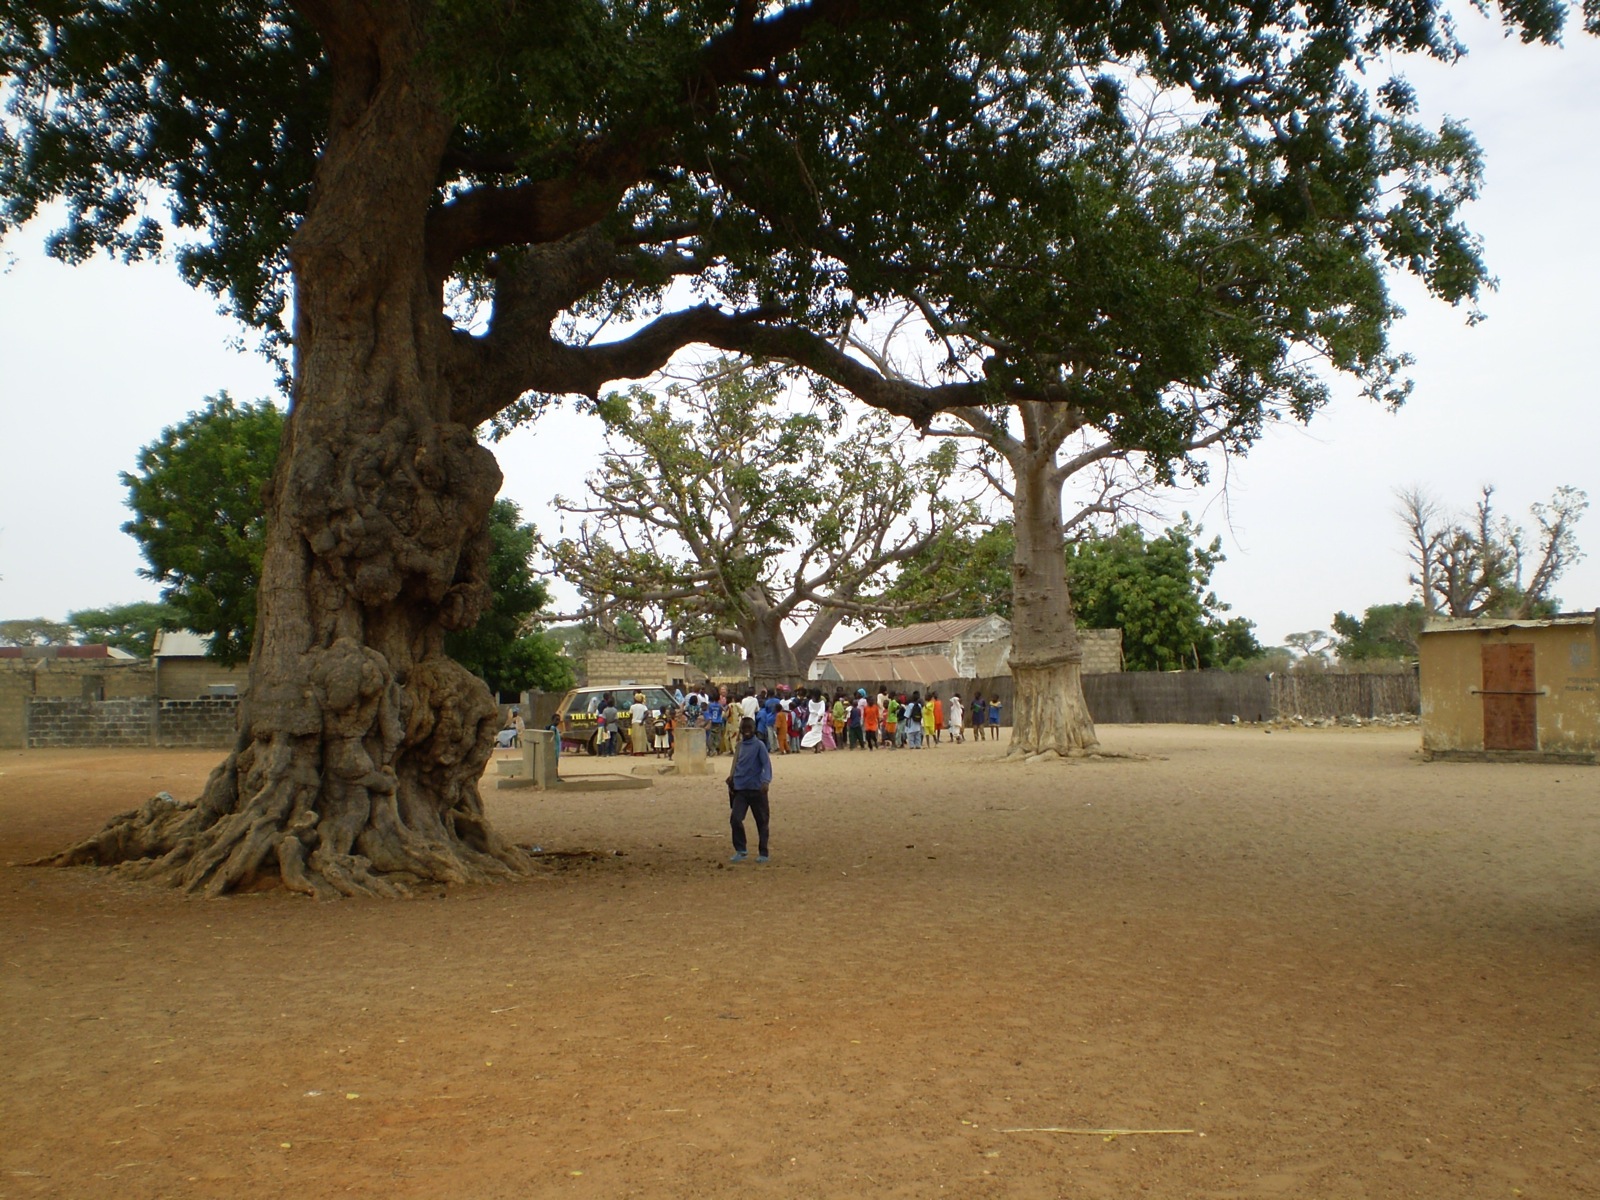 a man in the dirt under a large tree